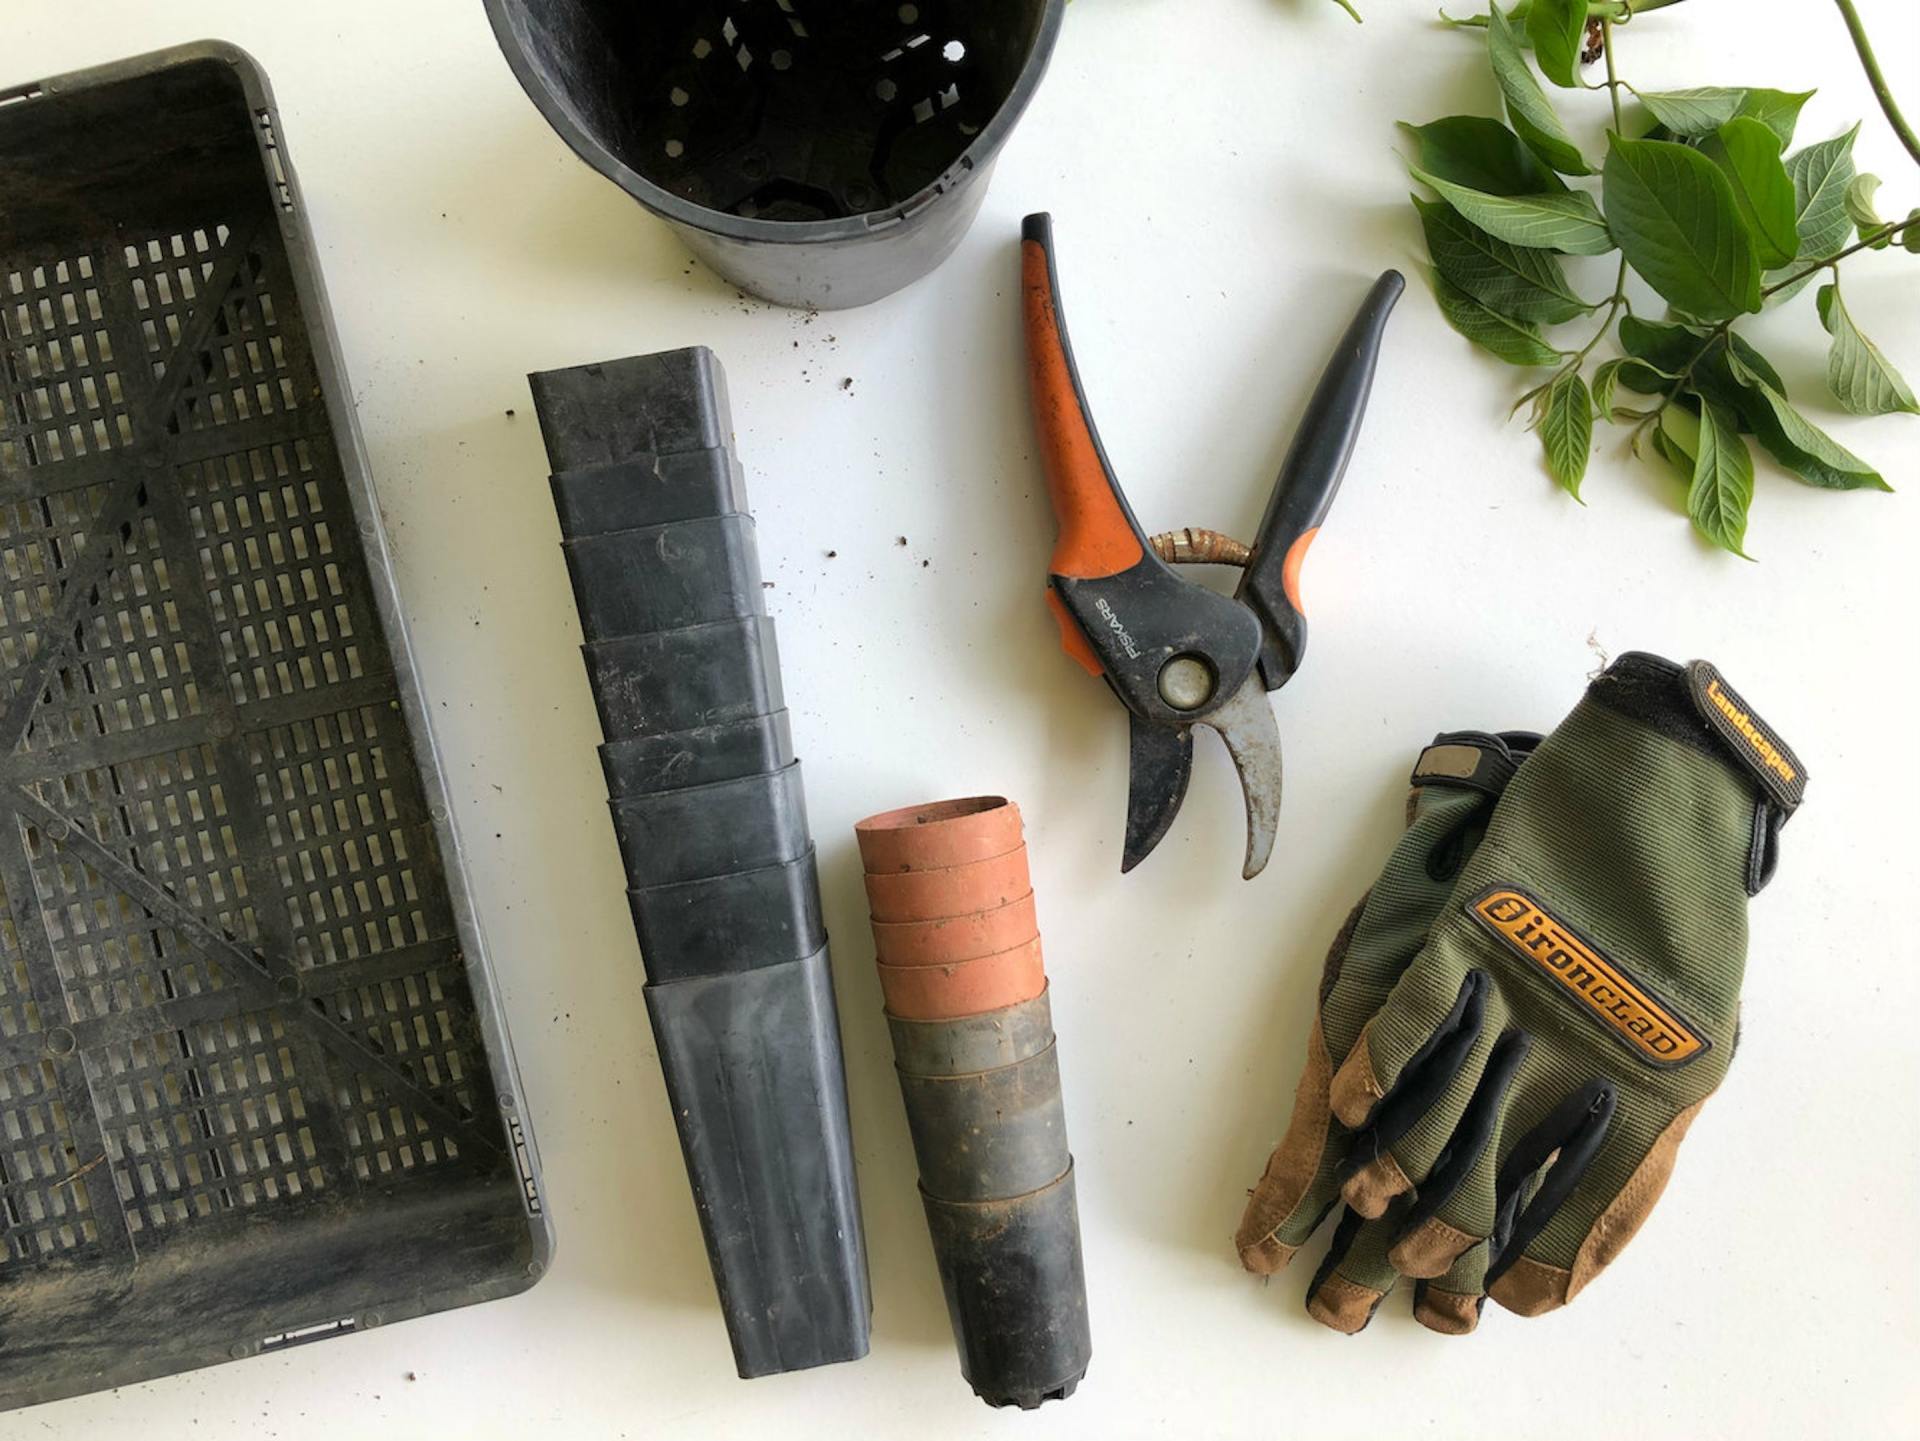 Garden tools, empty planters, pruning tool, and garden gloves on table.